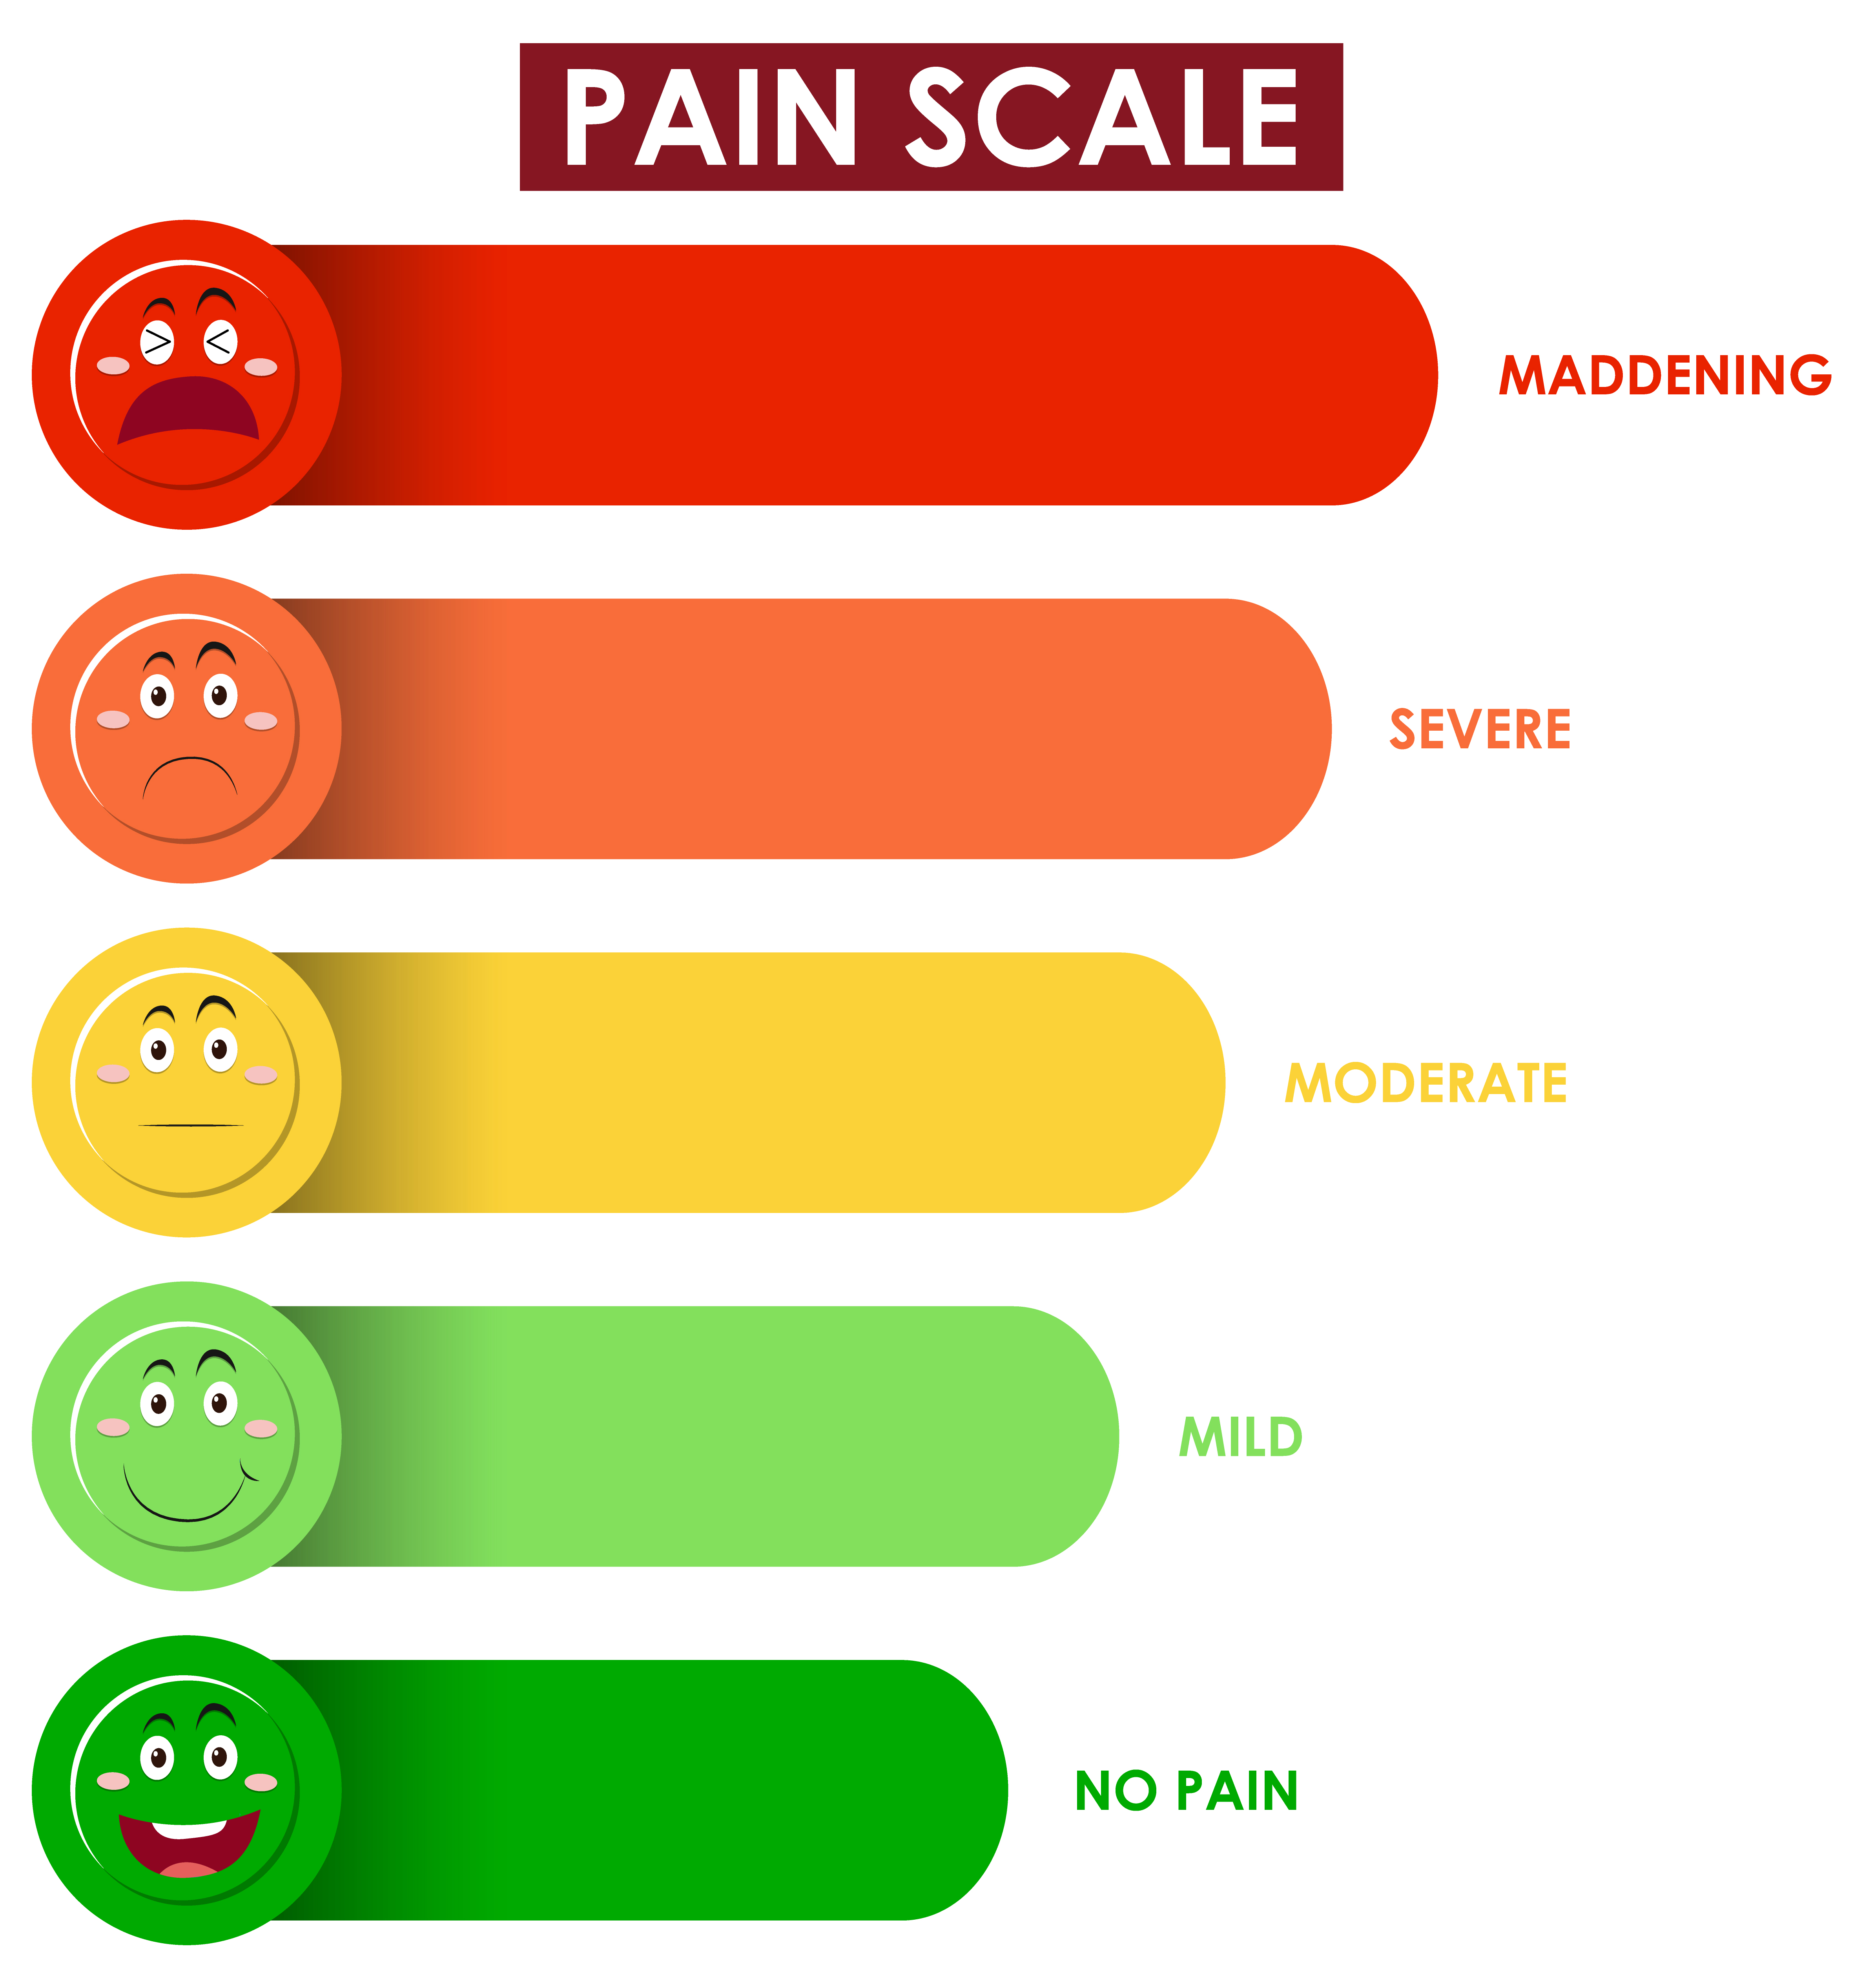 Albums 93+ Background Images Pain Scale With Pictures Full HD, 2k, 4k